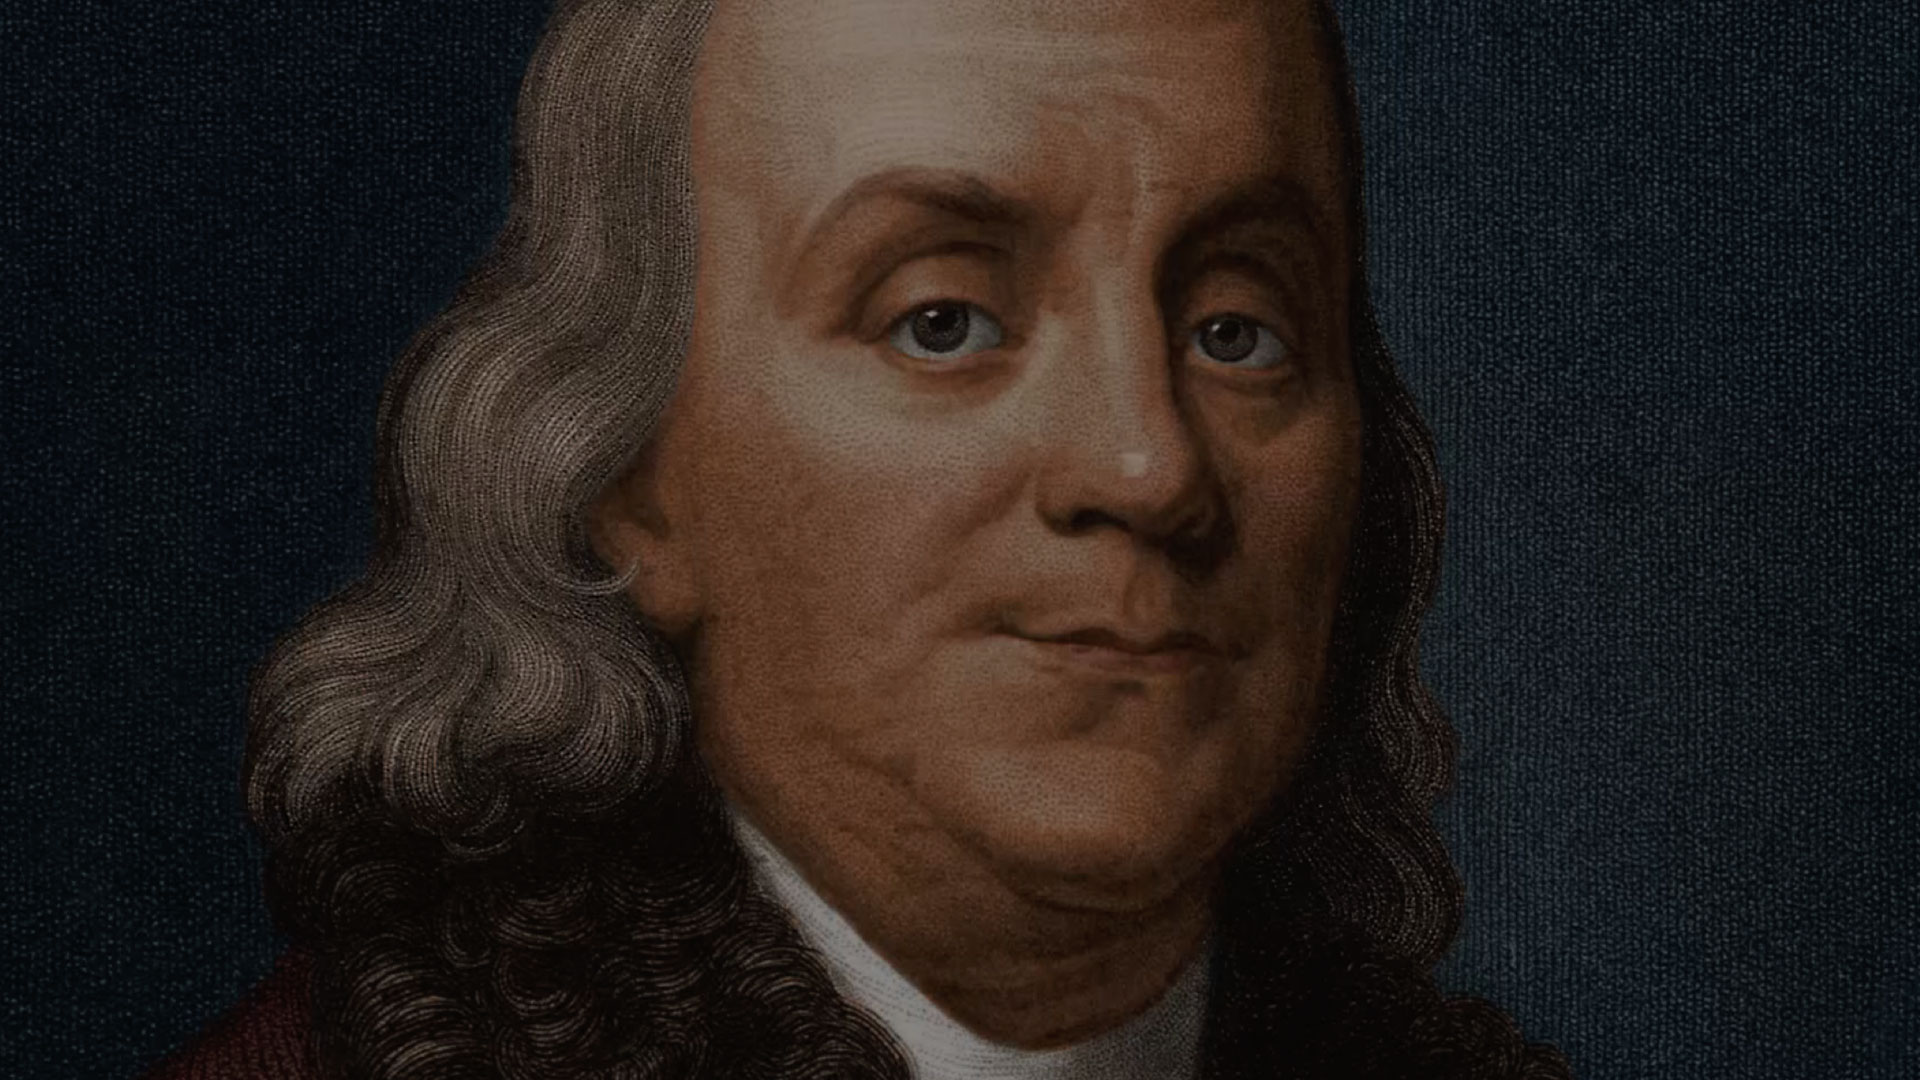 Benjamin Franklin - Biography, Inventions & Facts